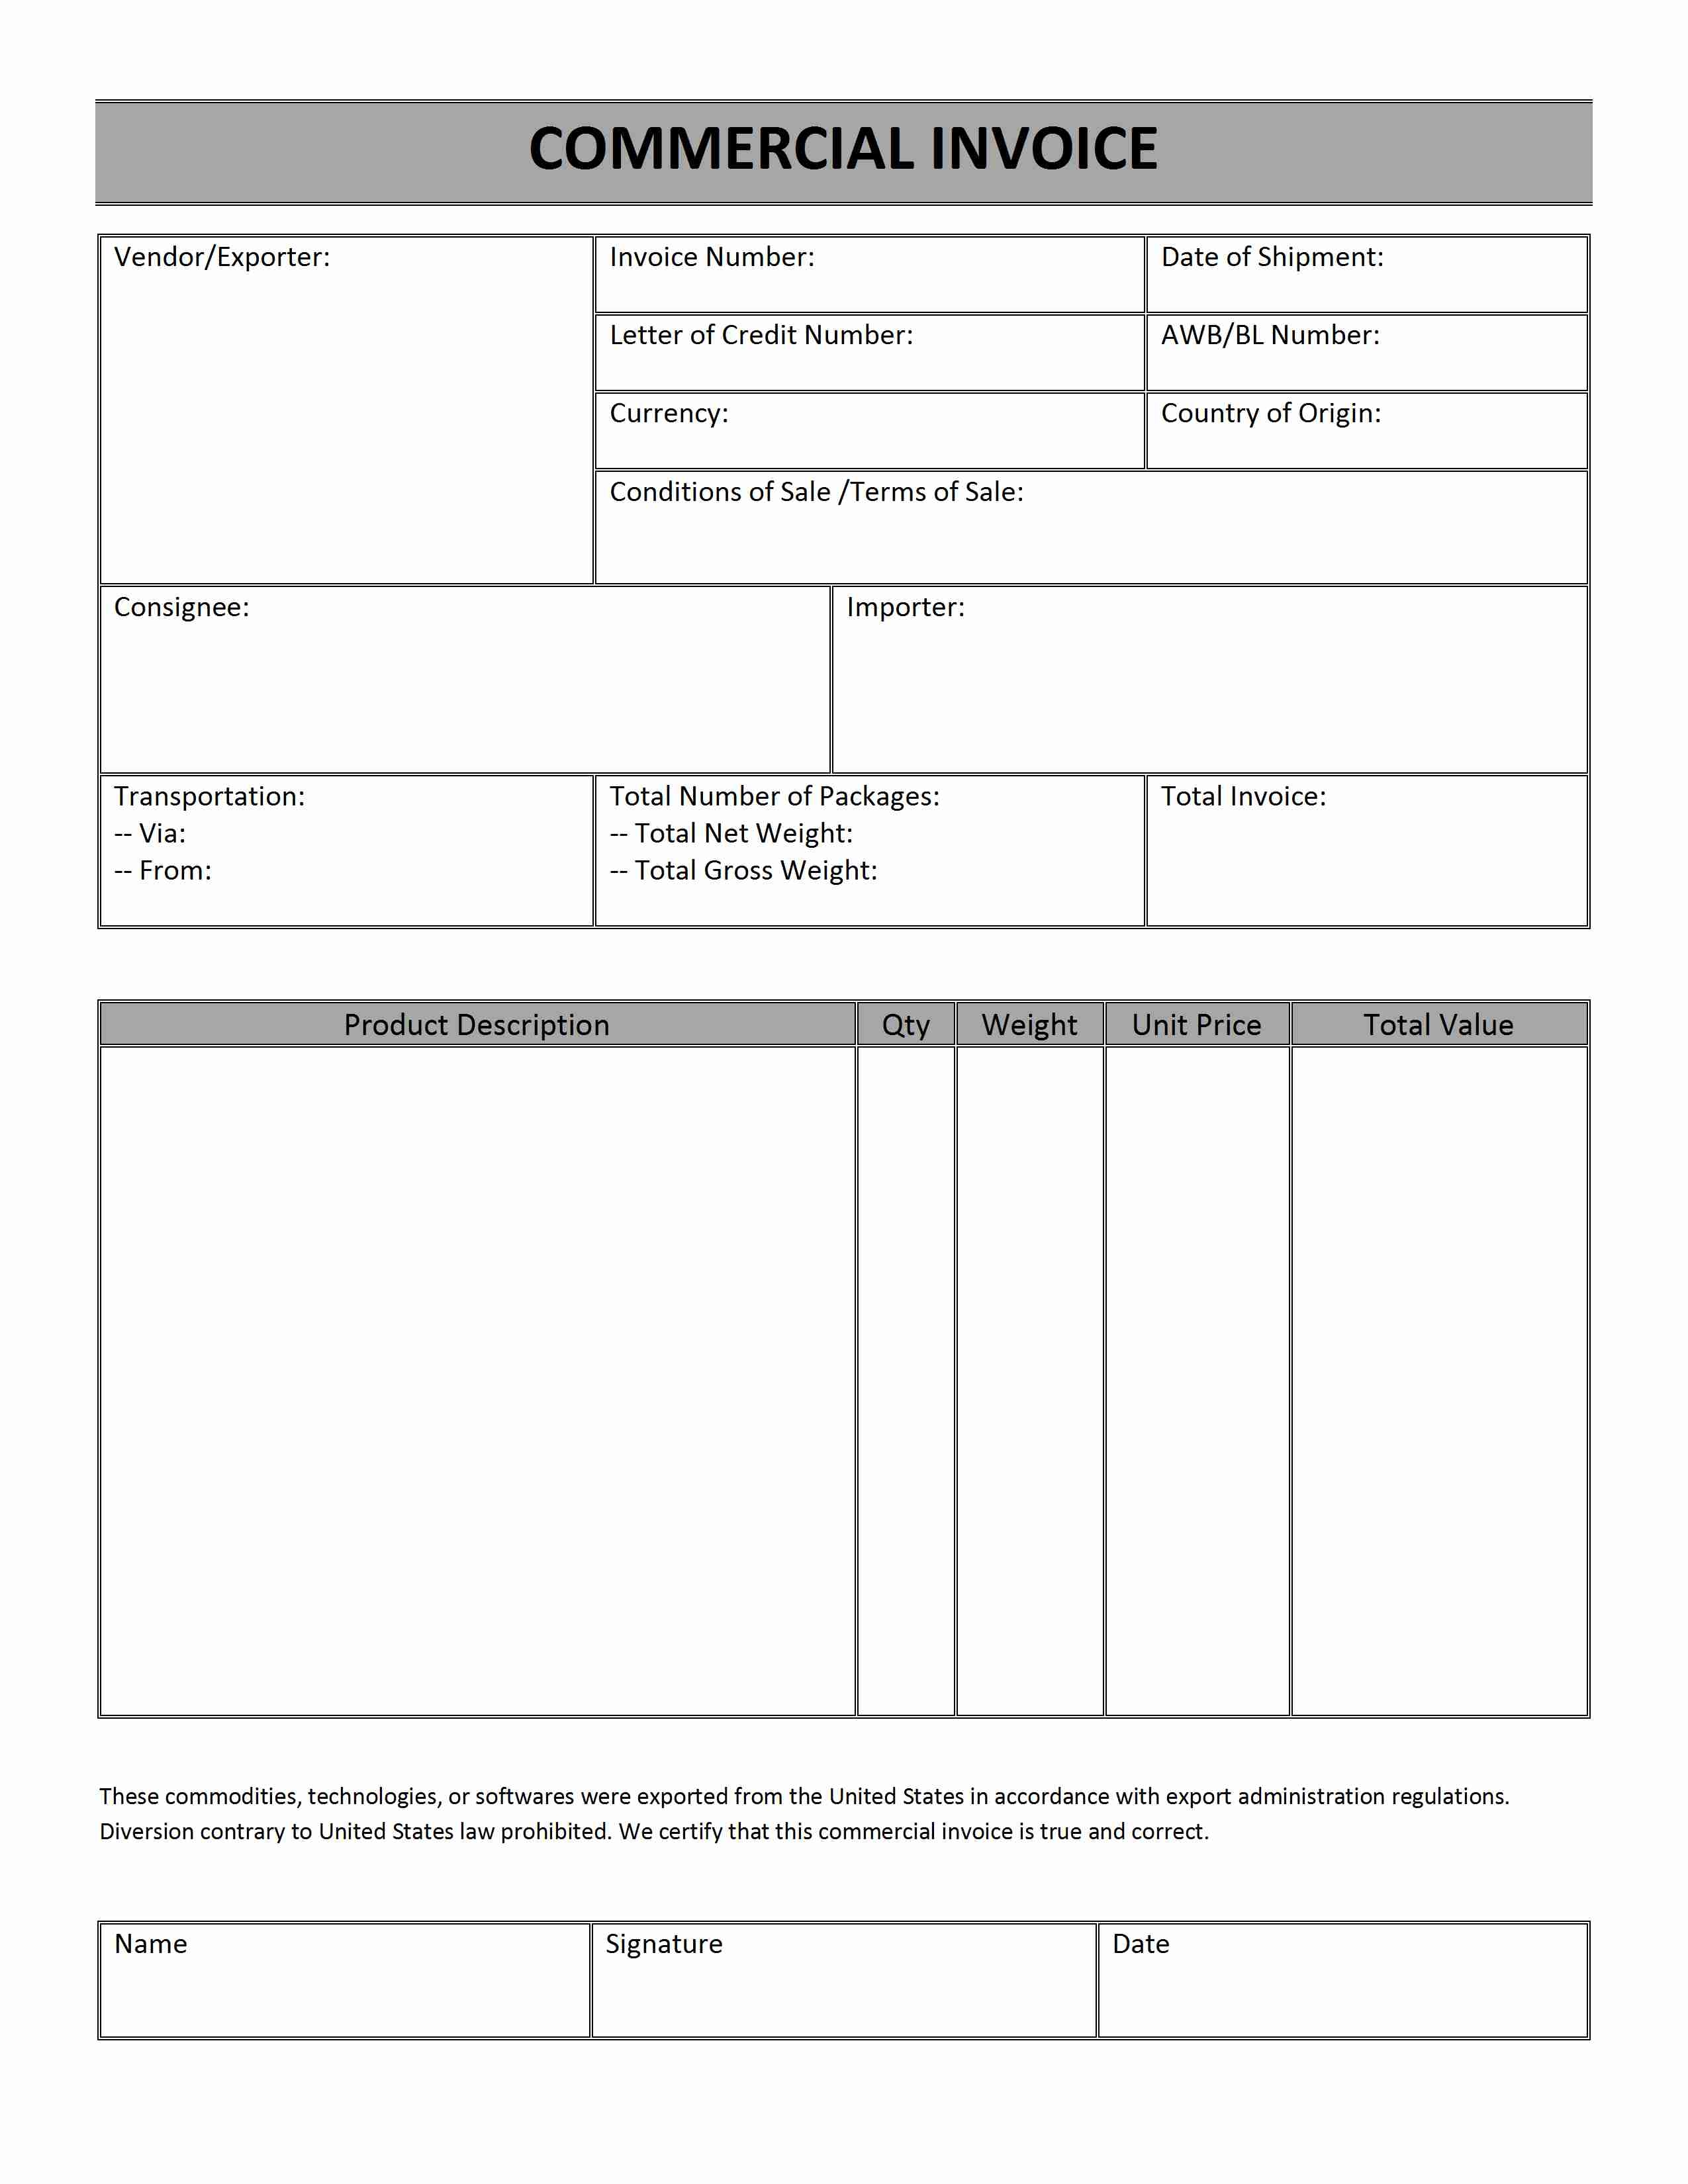 commercial invoice word templates free word templates ms commercial invoices for customs